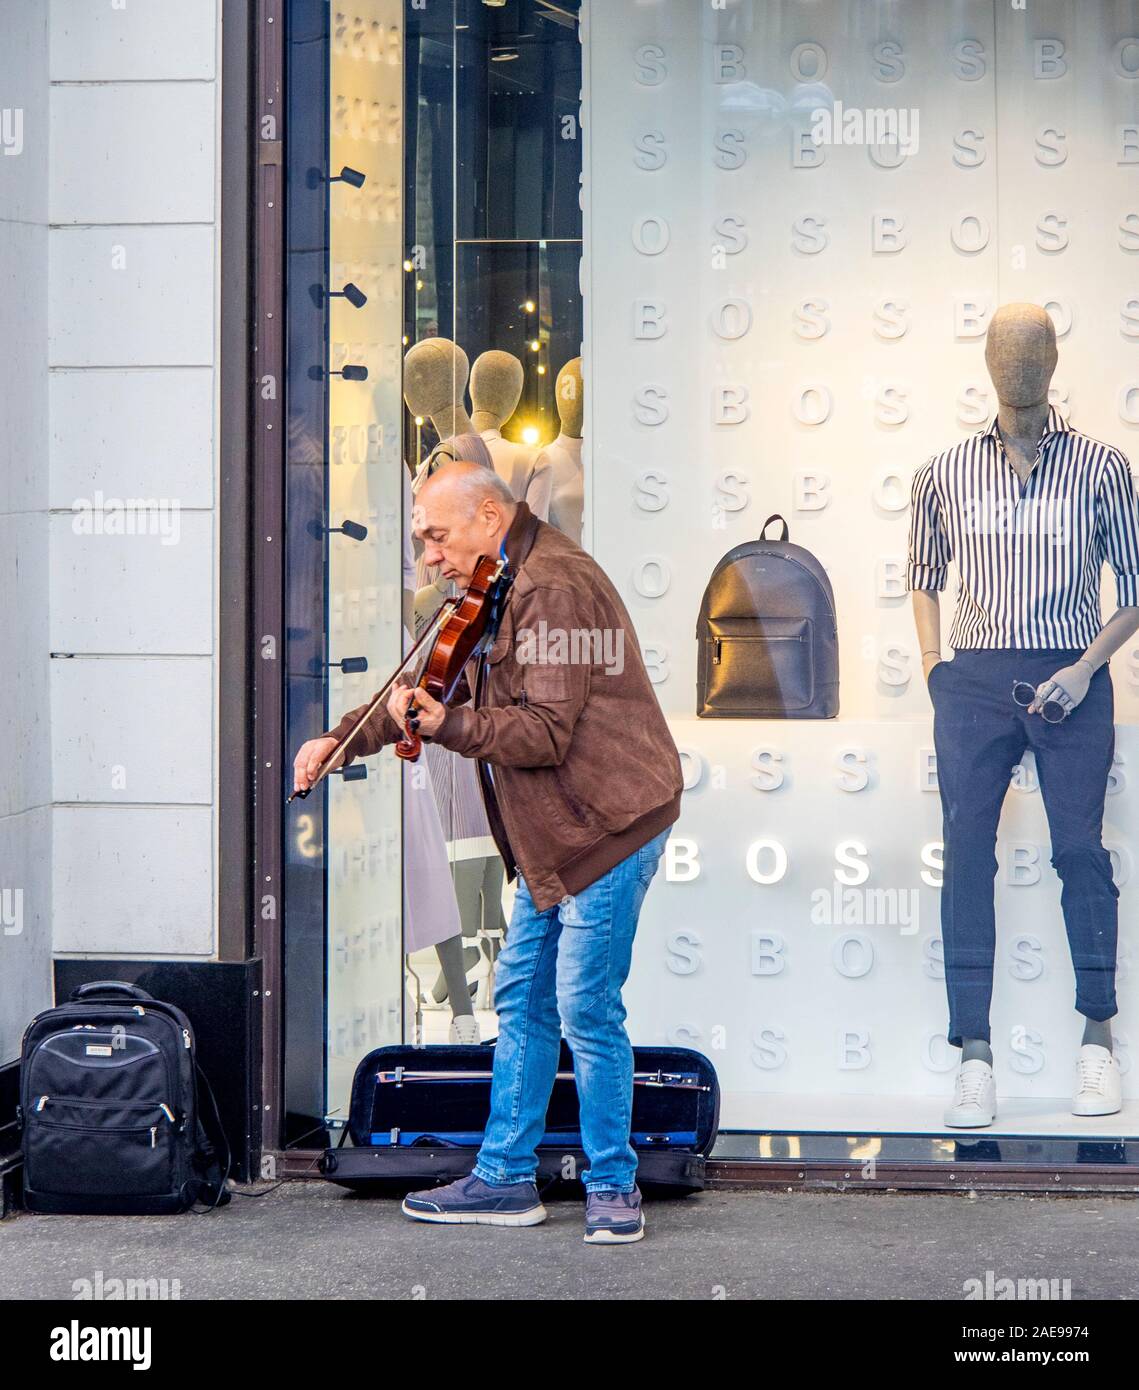 Busk Busker High Resolution Stock Photography and Images - Alamy